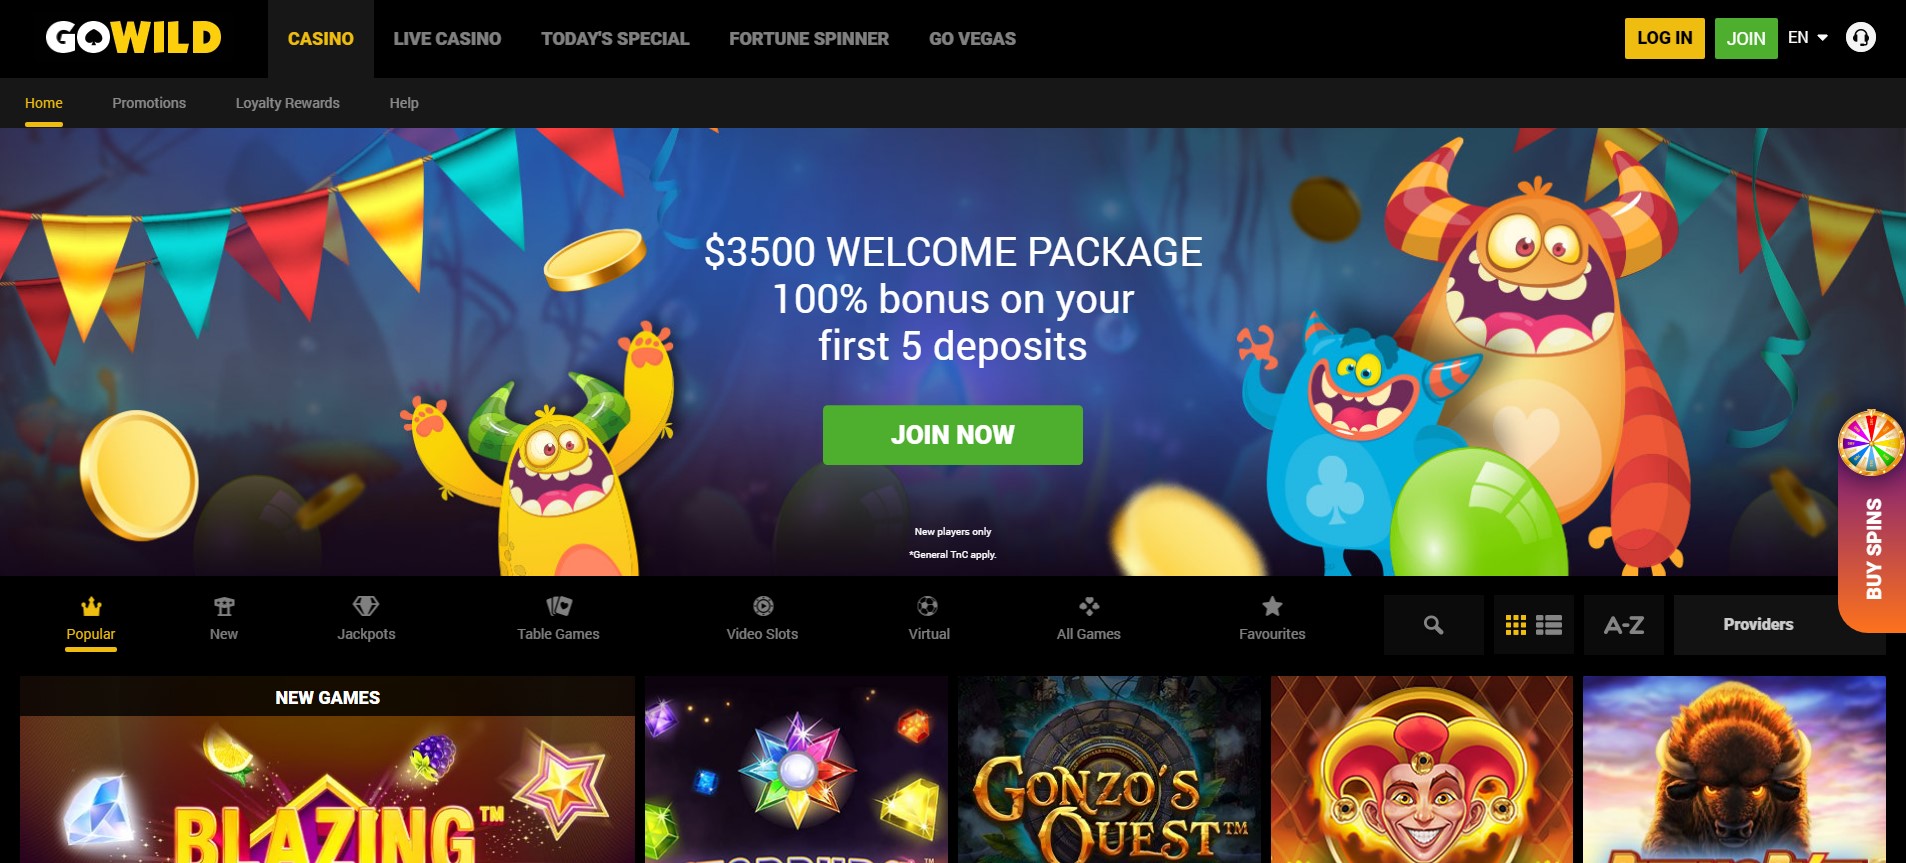 gowild casino possibly shutting down